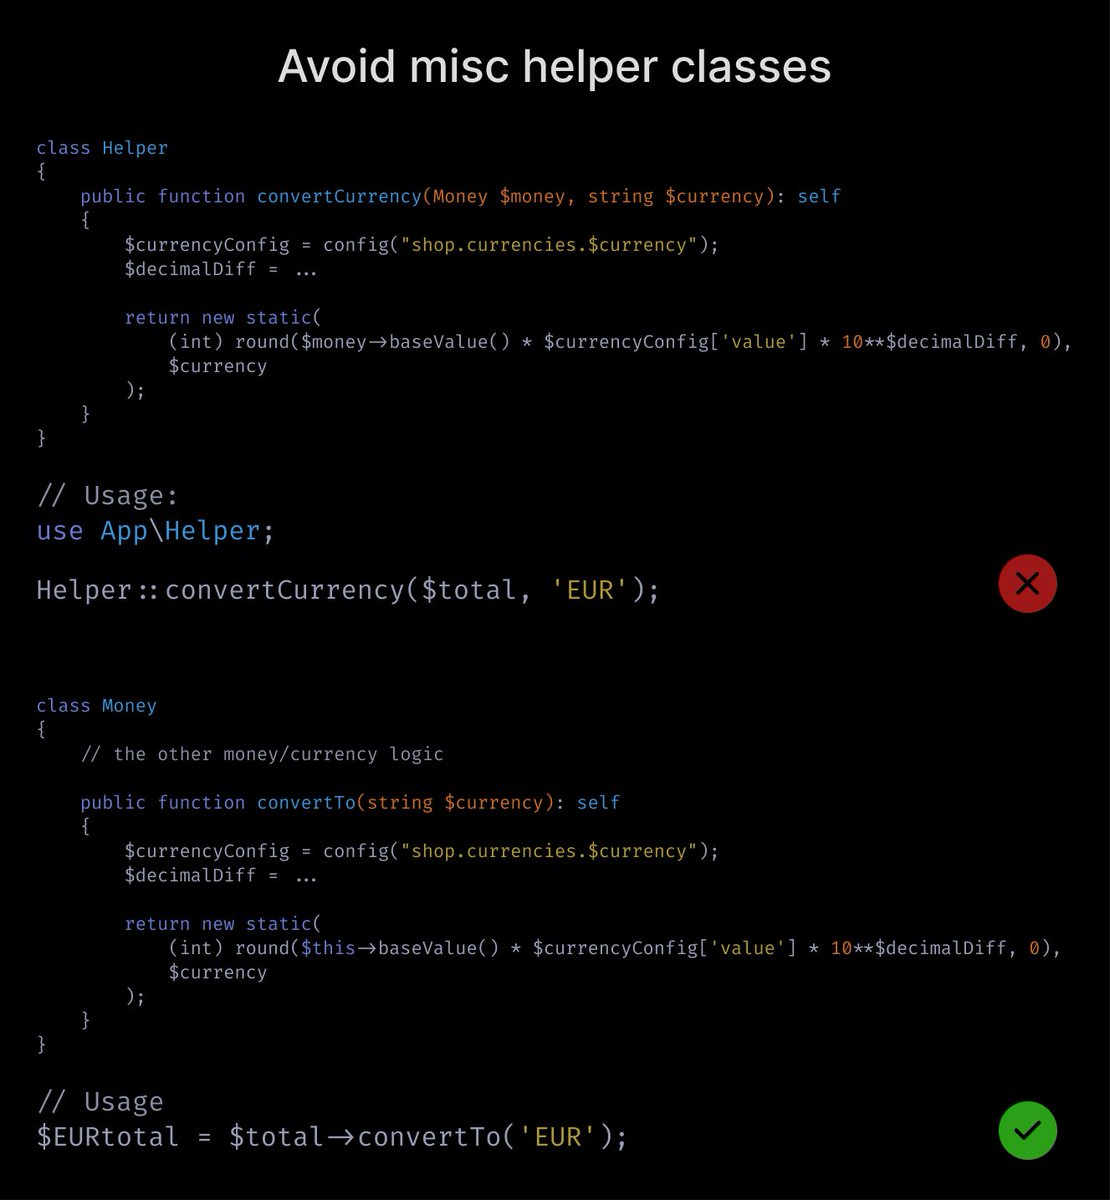  Avoid helper *classes*.Sometimes people put helpers into a class.Beware, it can get messy. This is a class with only static methods used as helper functions. It's usually better to put these methods into classes with related logic or just keep them as global functions.